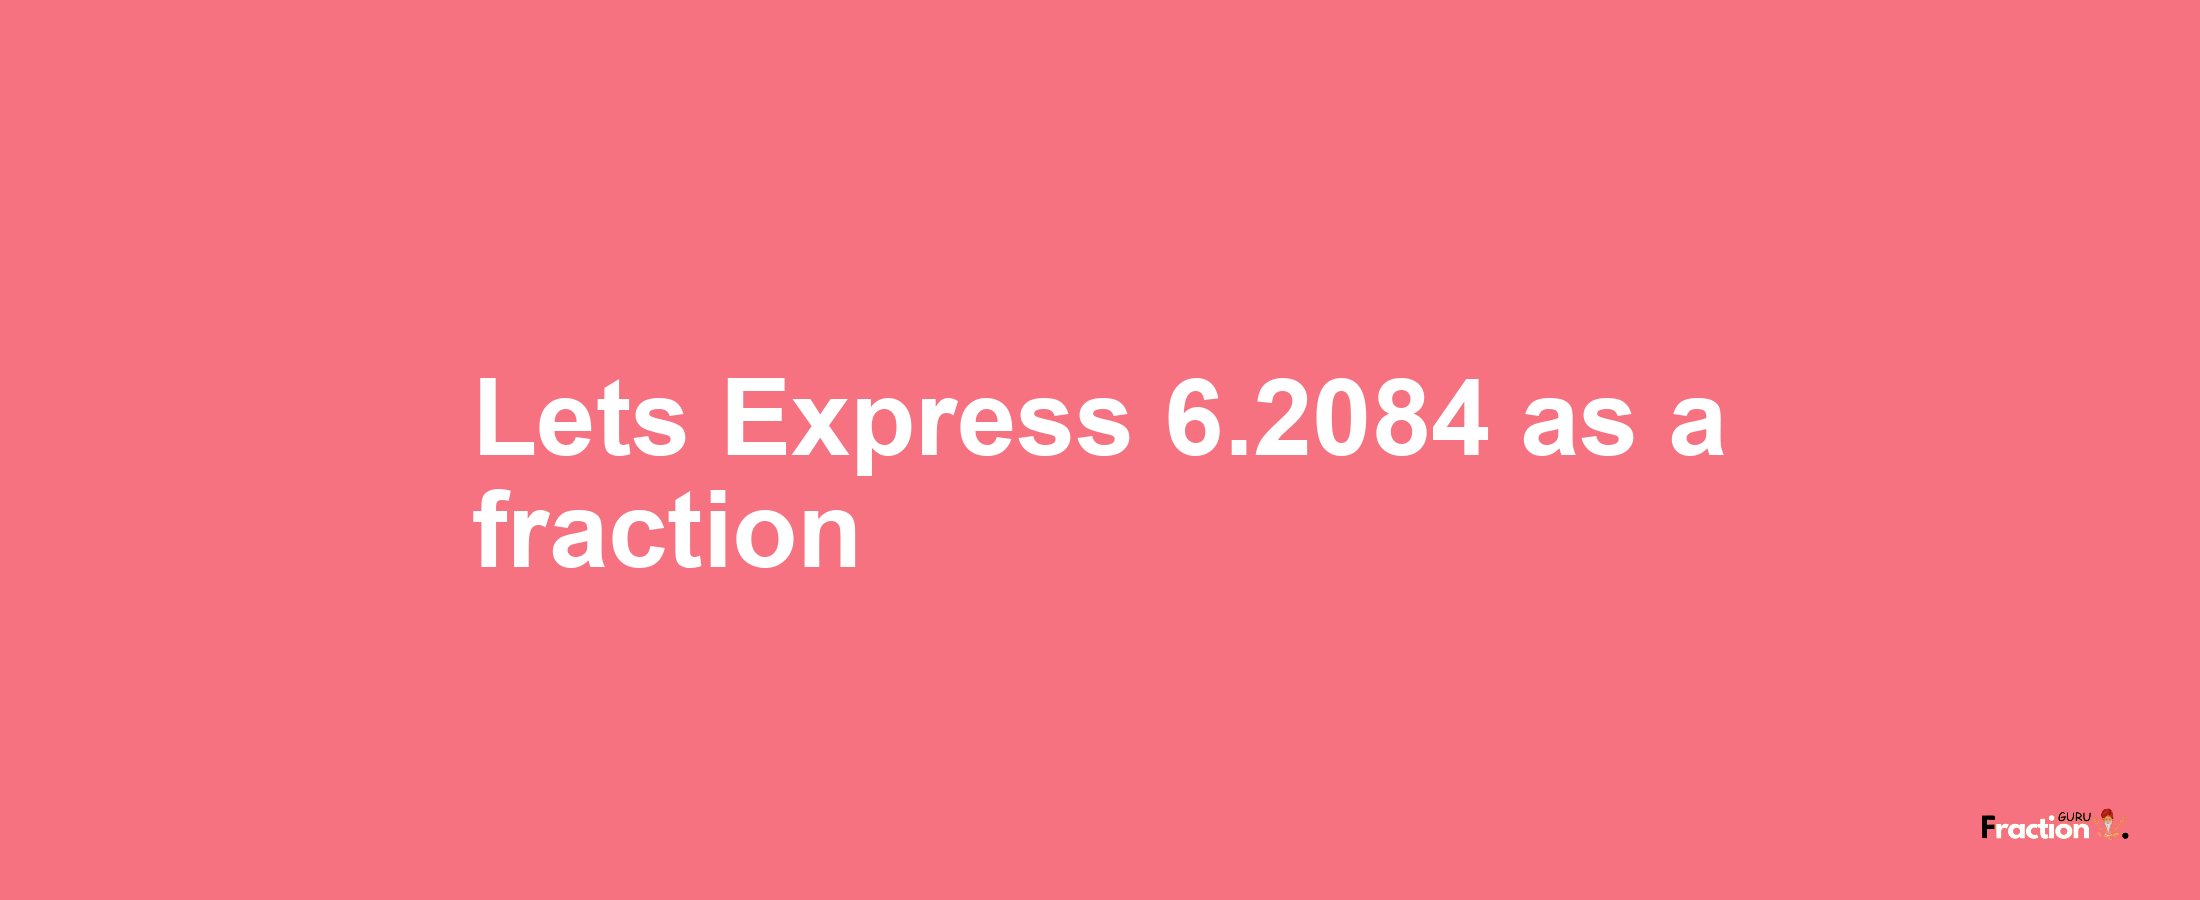 Lets Express 6.2084 as afraction